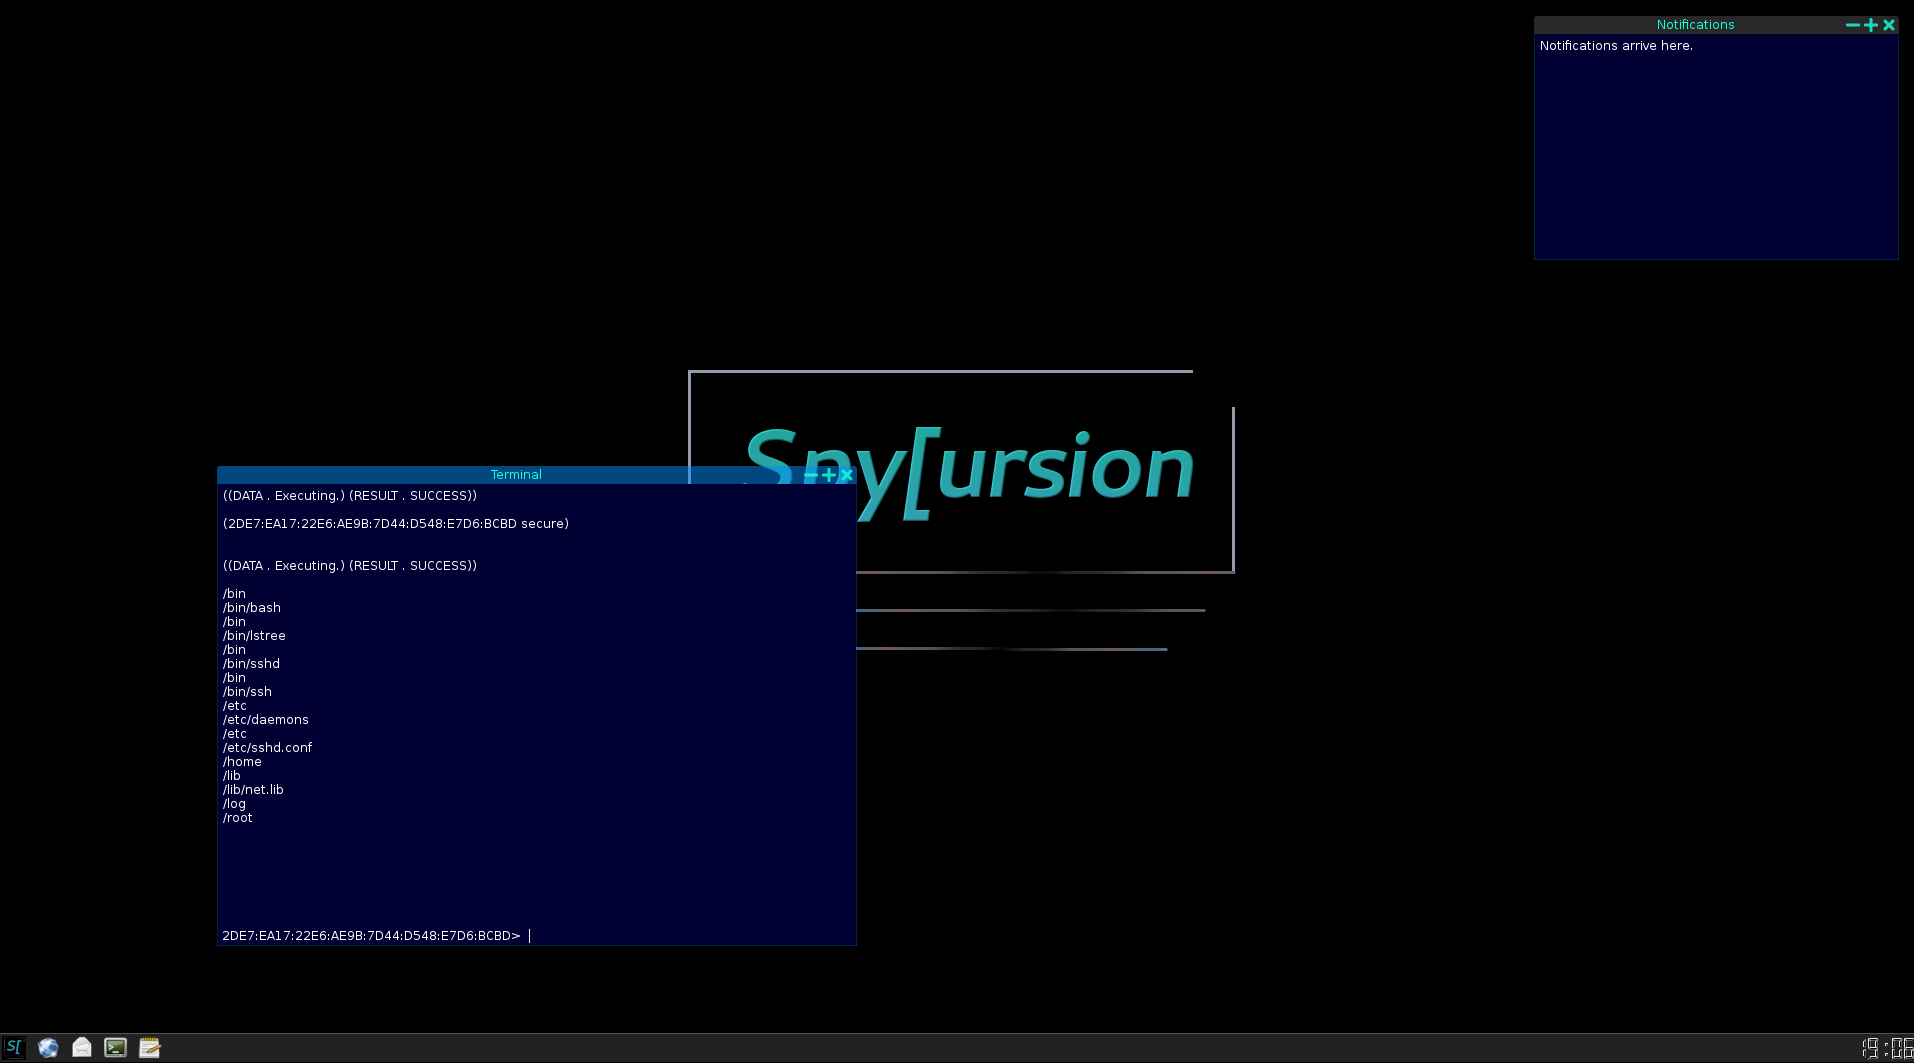 An example of the desktop UI in Spycursion